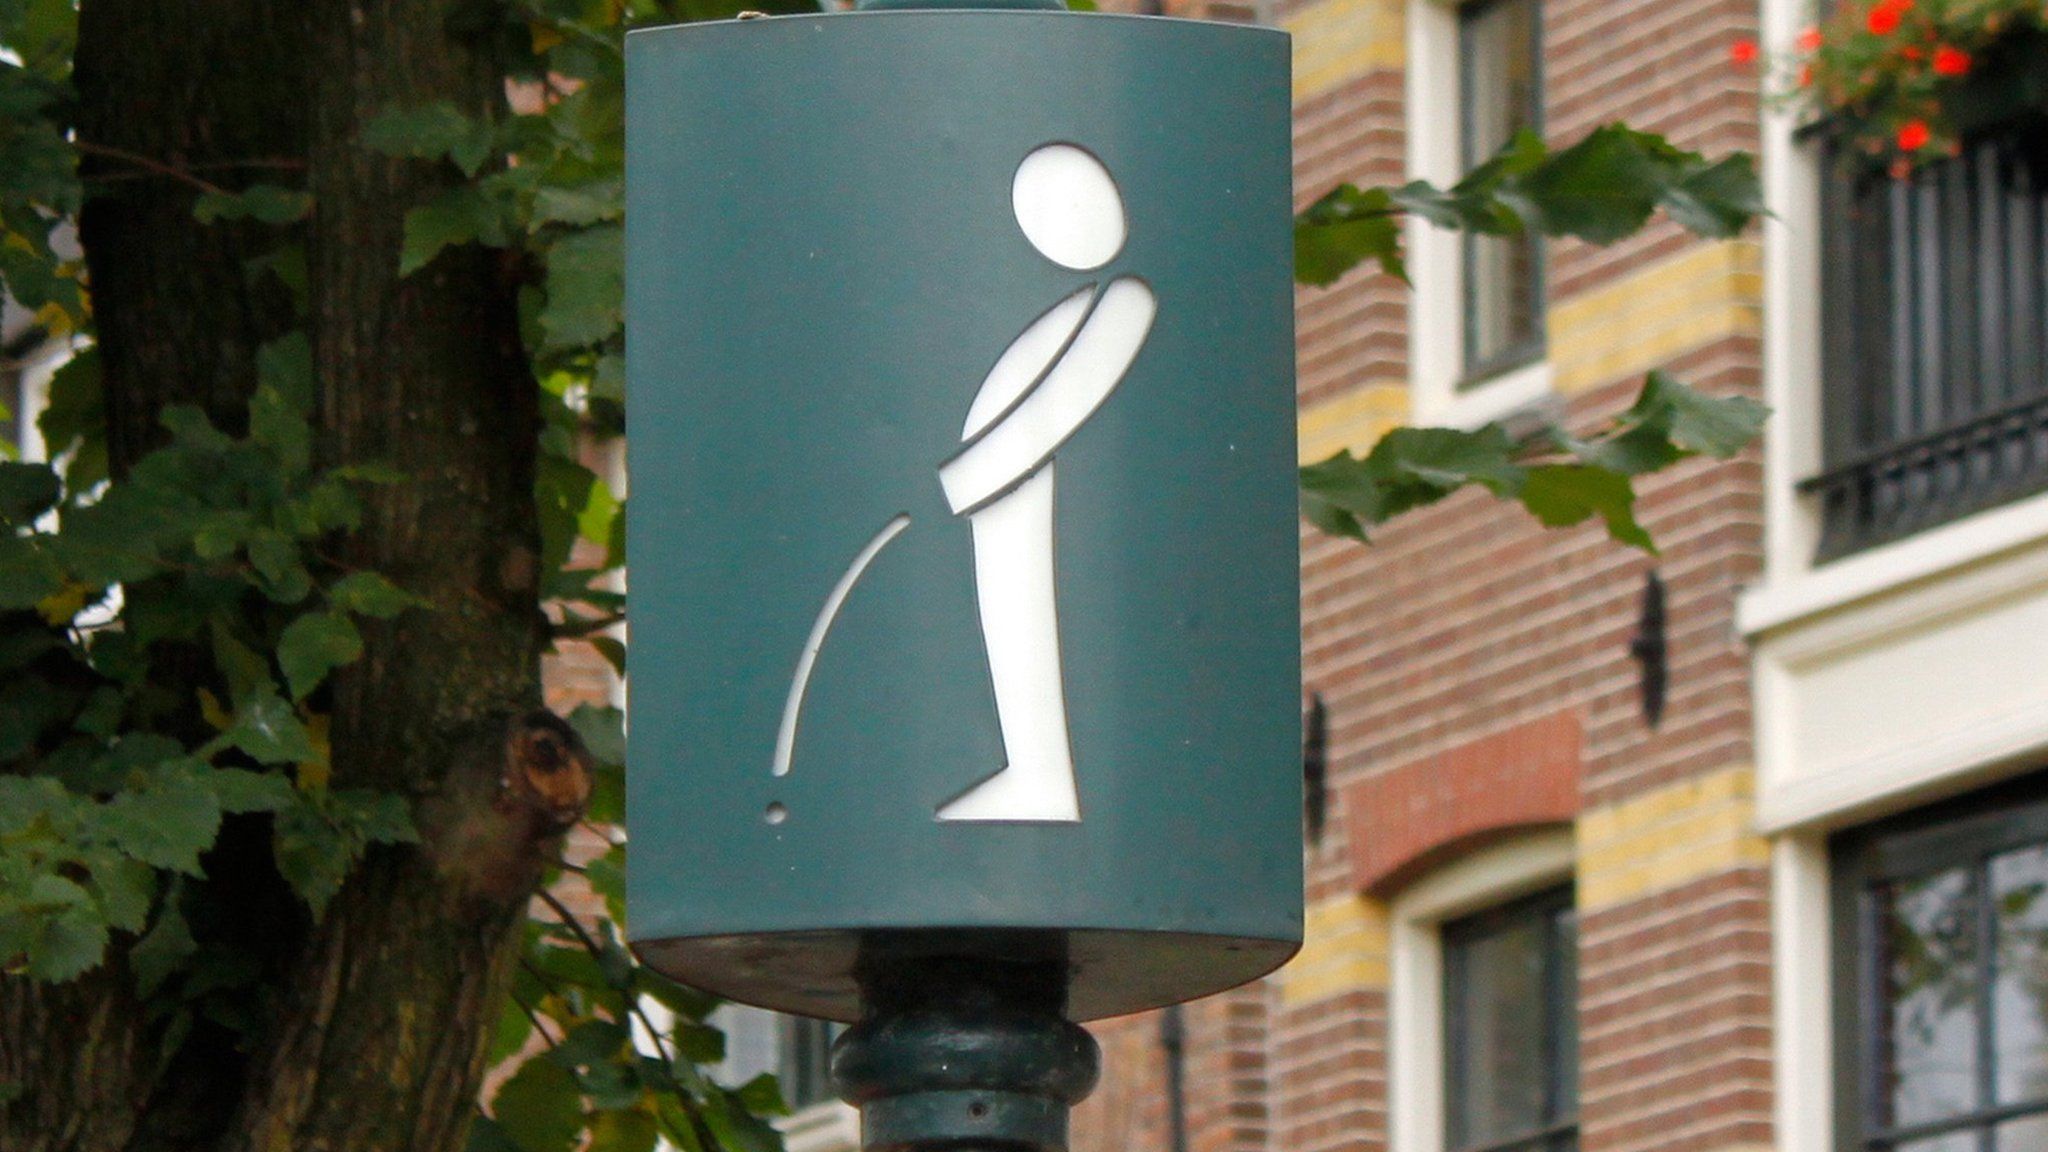 Sign for men's urinal in Amsterdam